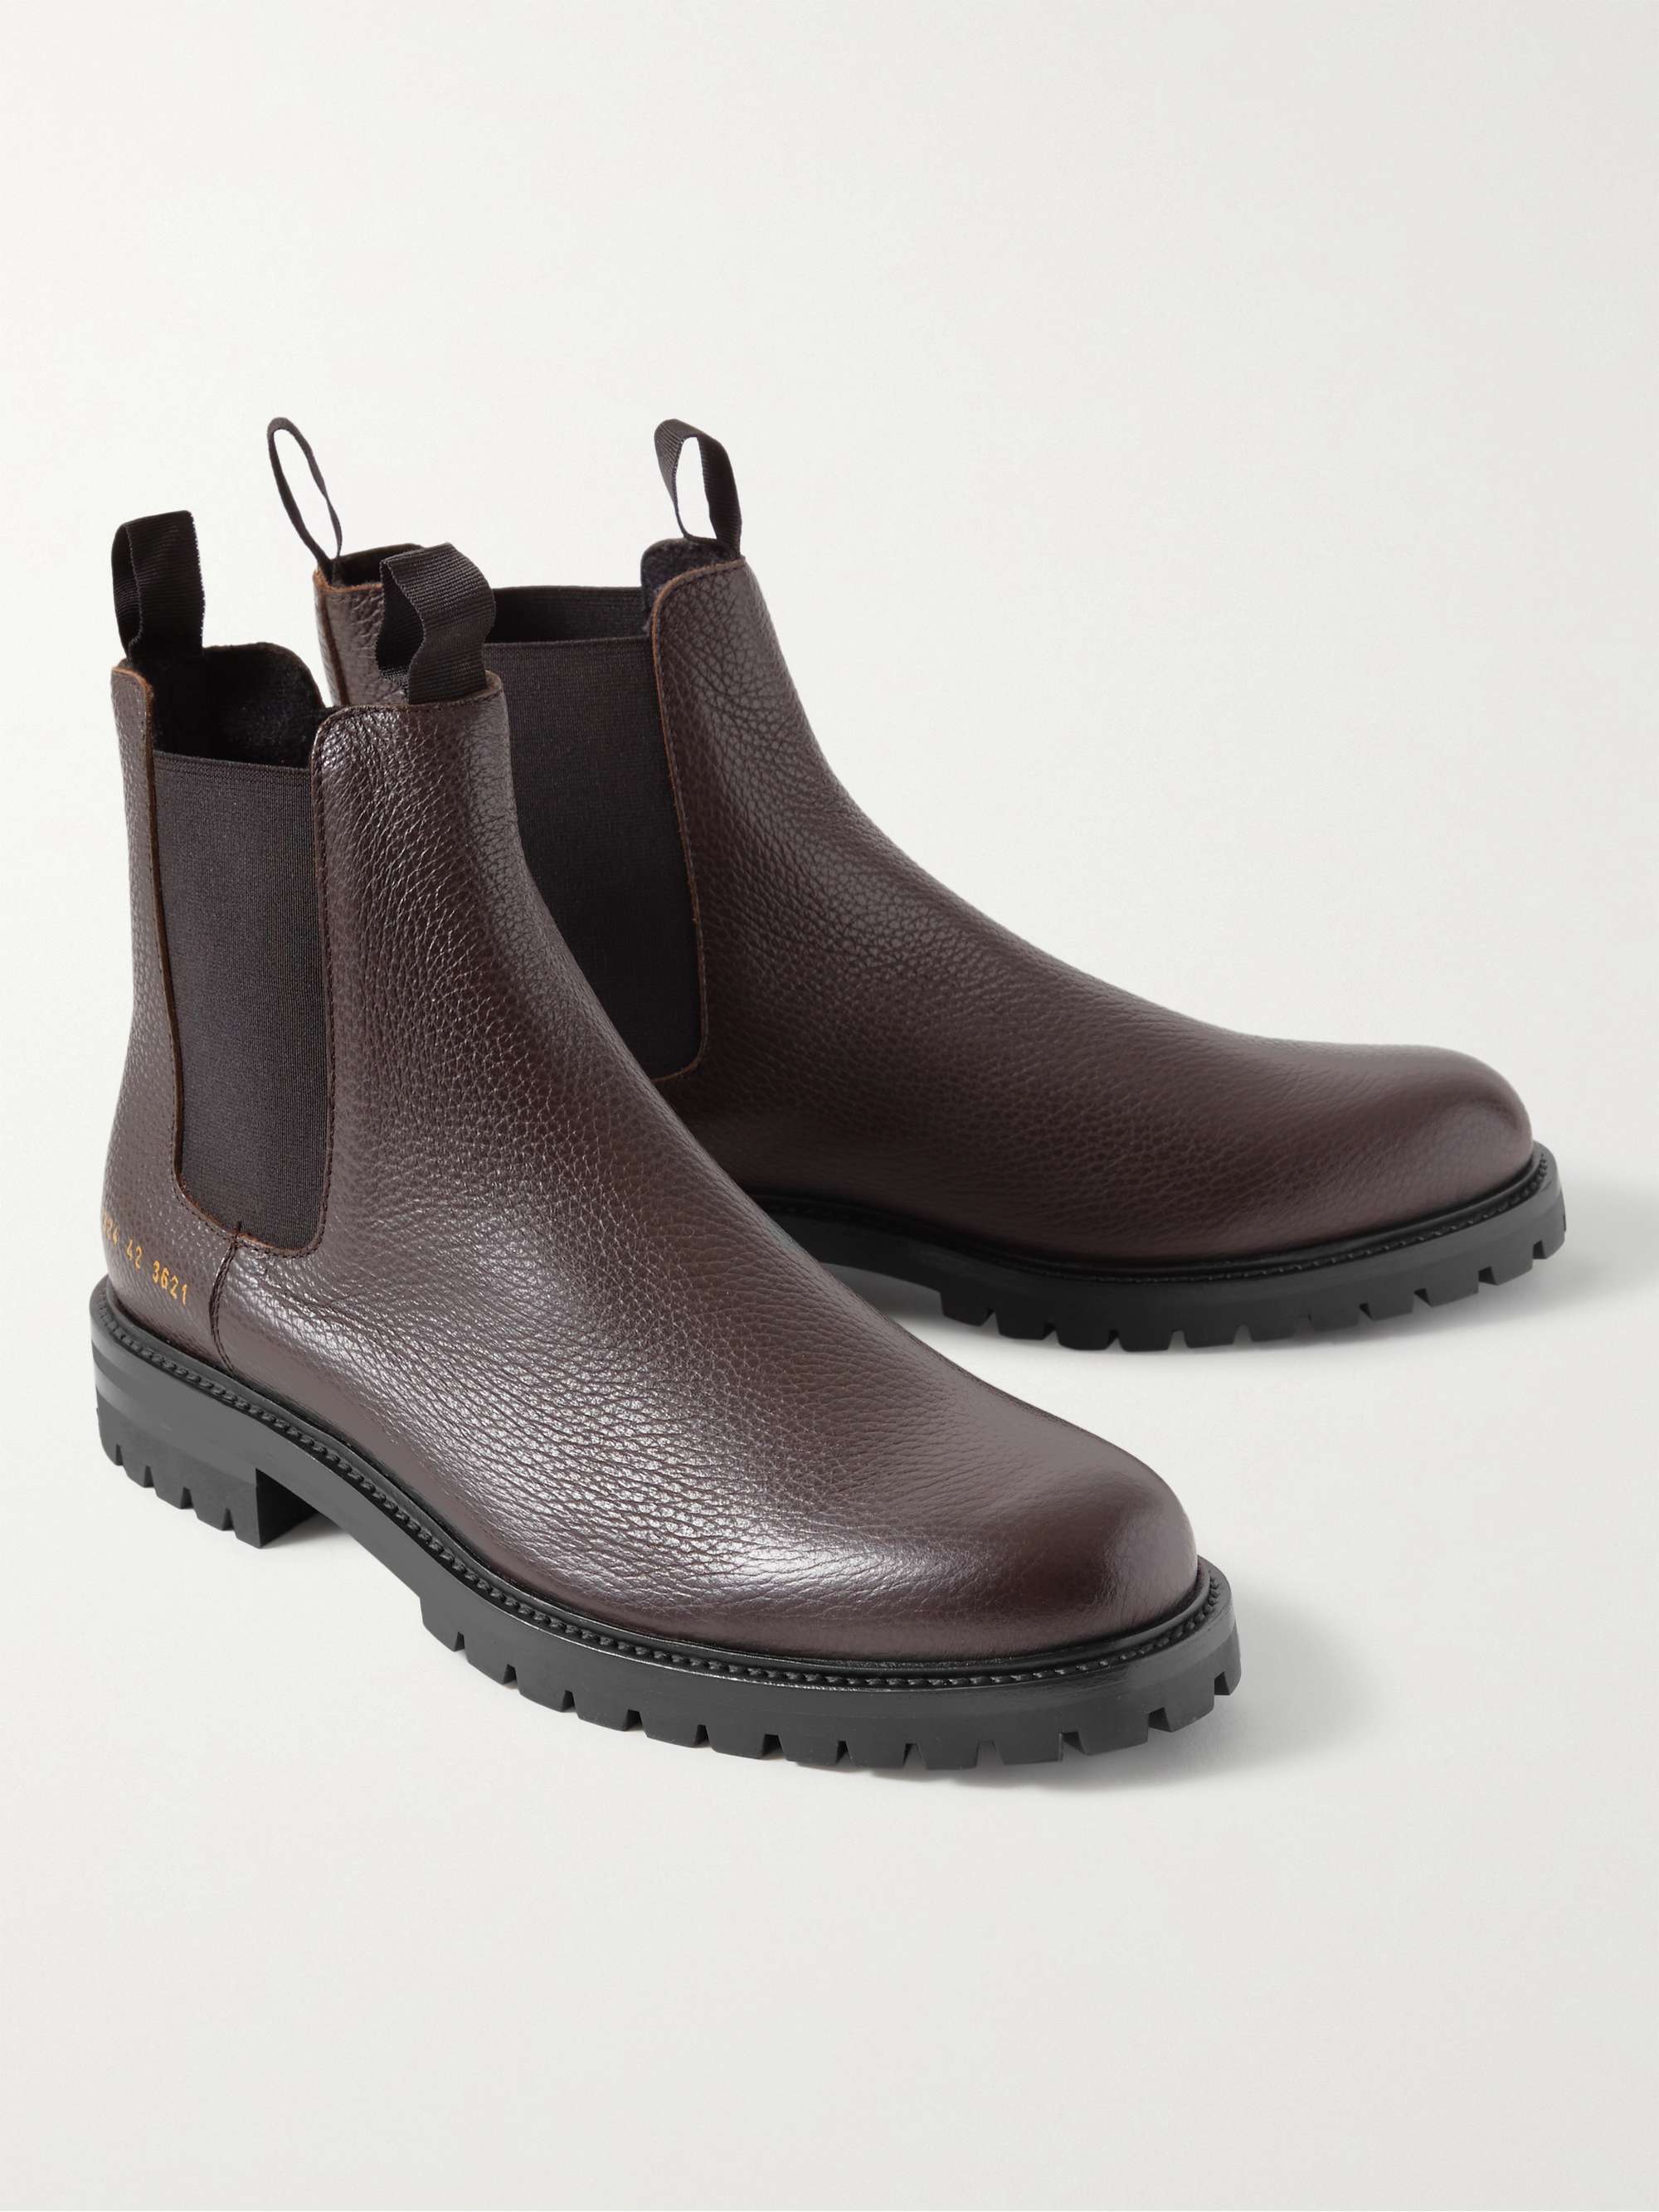 COMMON PROJECTS Full-Grain Leather Chelsea Boots